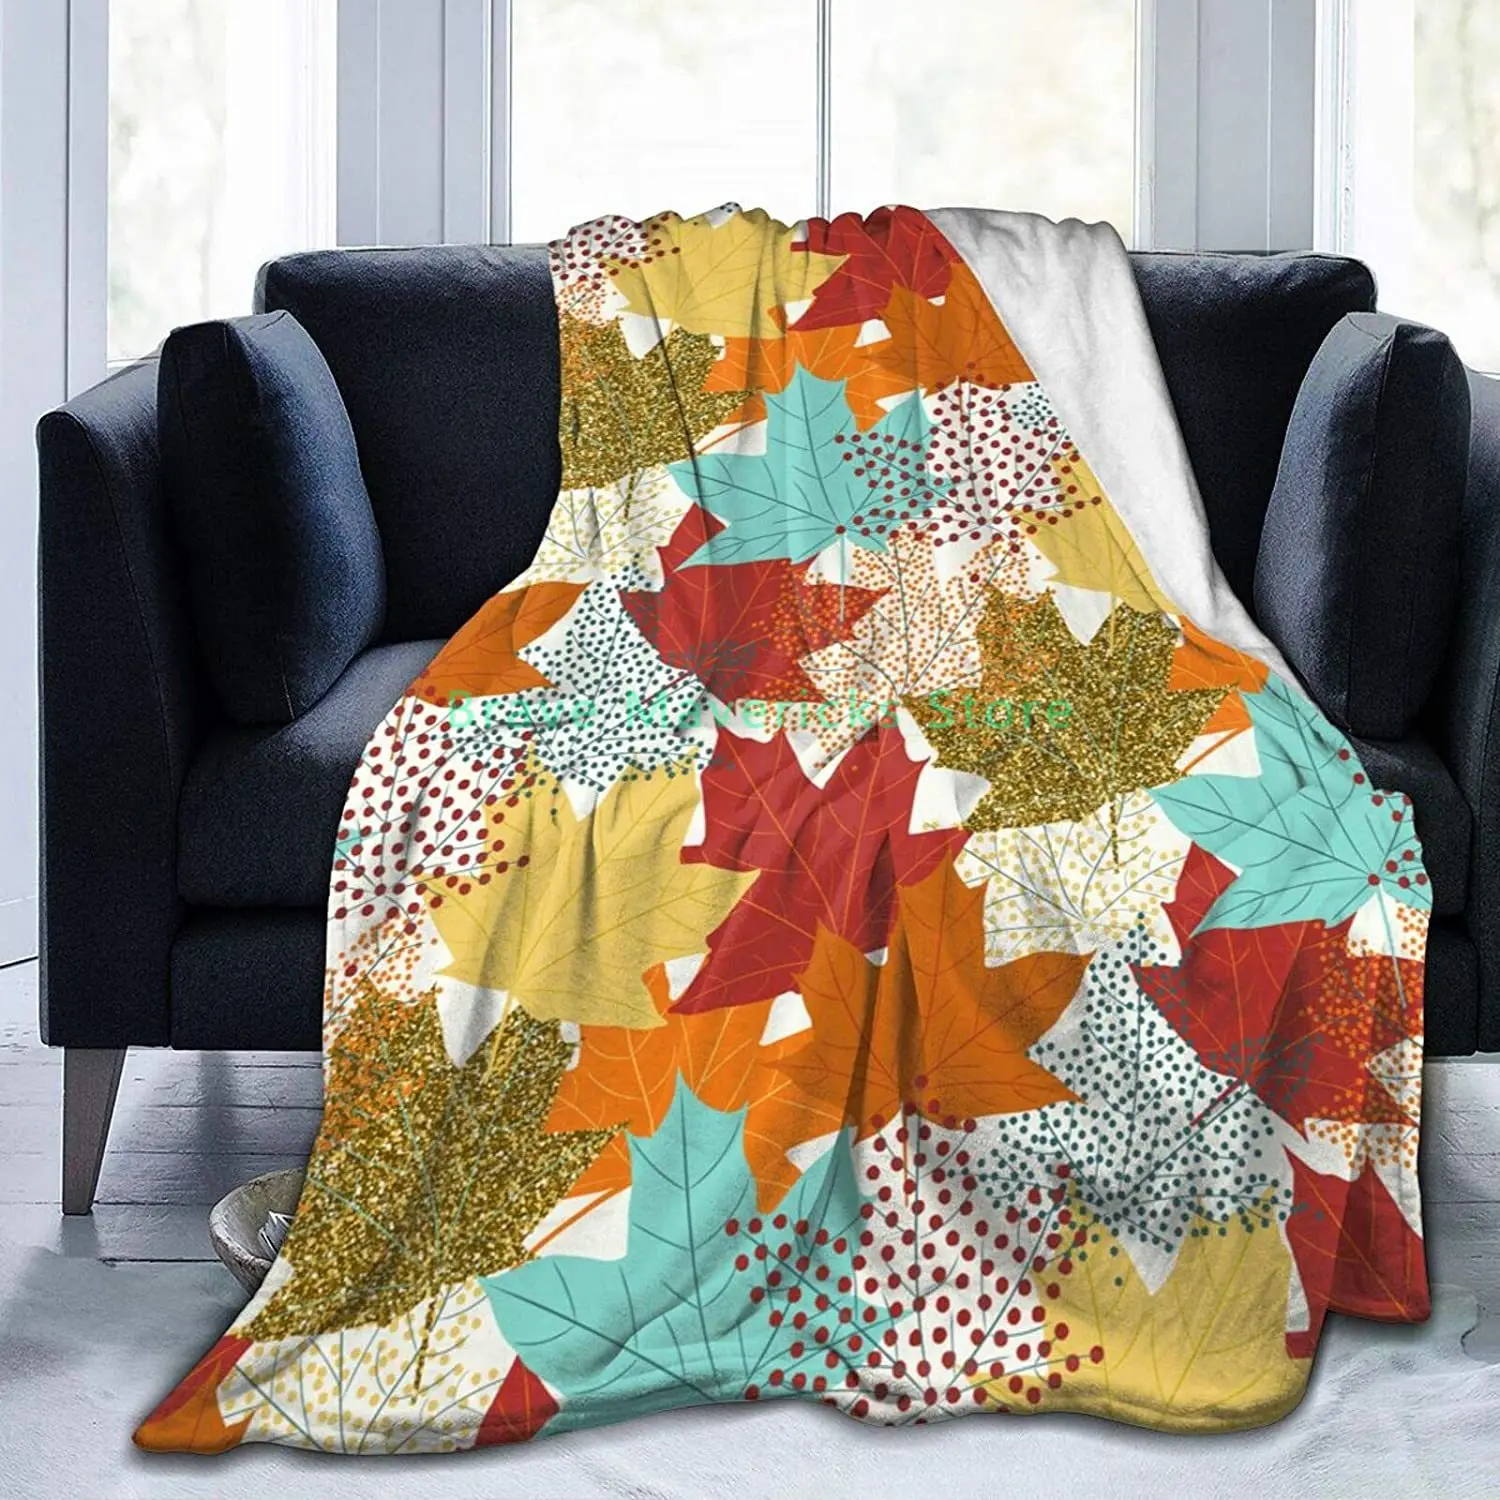 

Colorful Fall Maple Leaves Soft Throw Blanket All Season Microplush Warm Blanket Lightweight Flannel Fleece Blanket for Bed Sofa